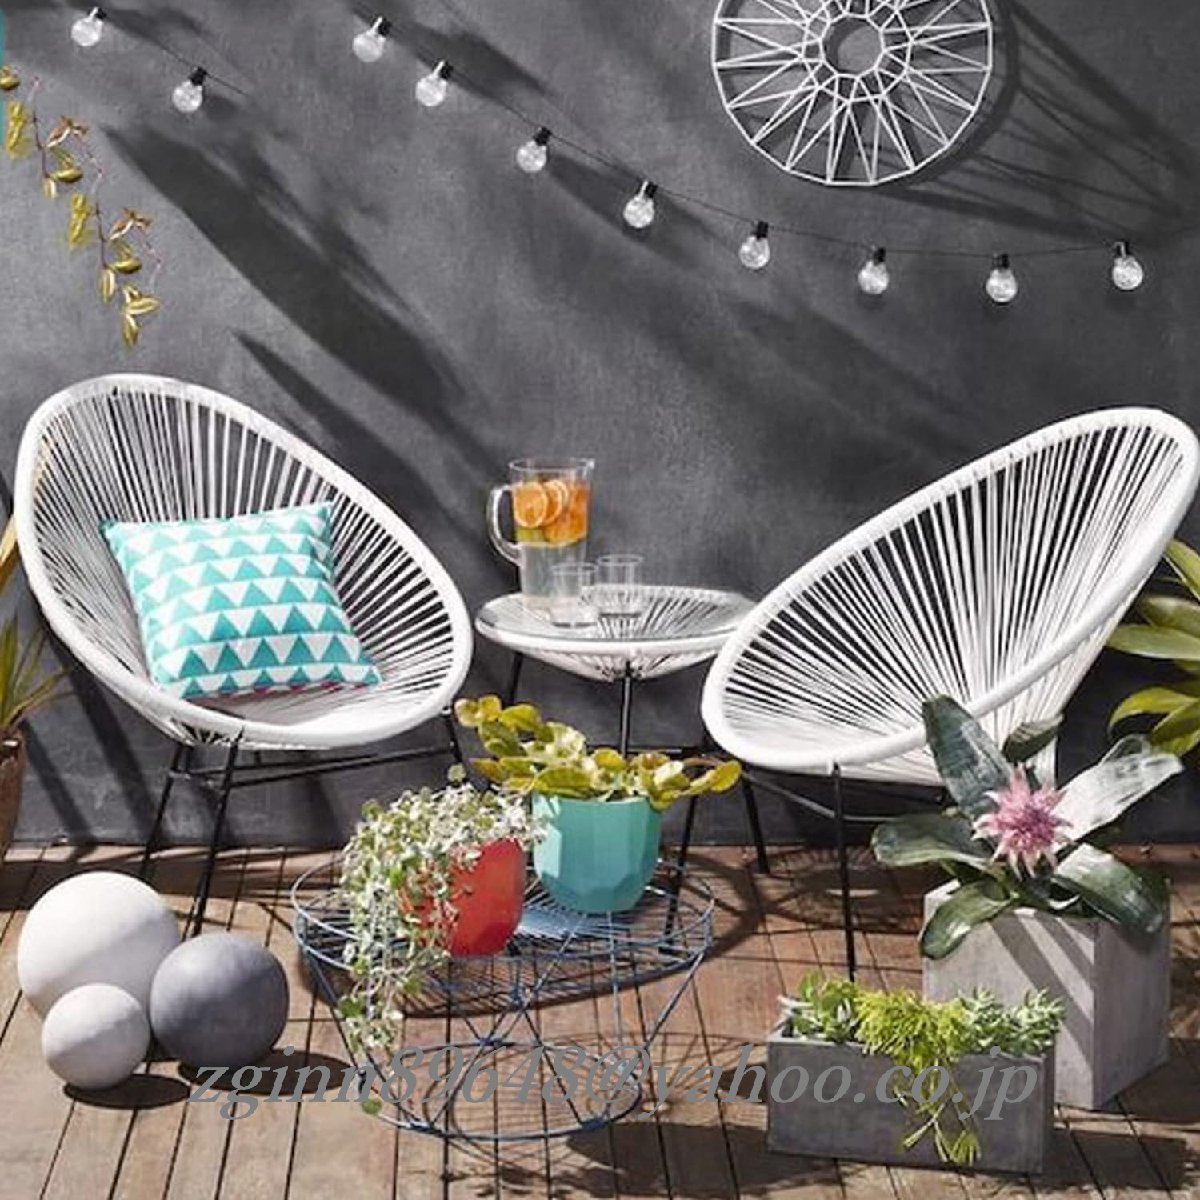  garden chair - rattan style garden sofa PE rattan chair table 3 point set stylish indoor . suited balcony, outdoors putty .o garden 